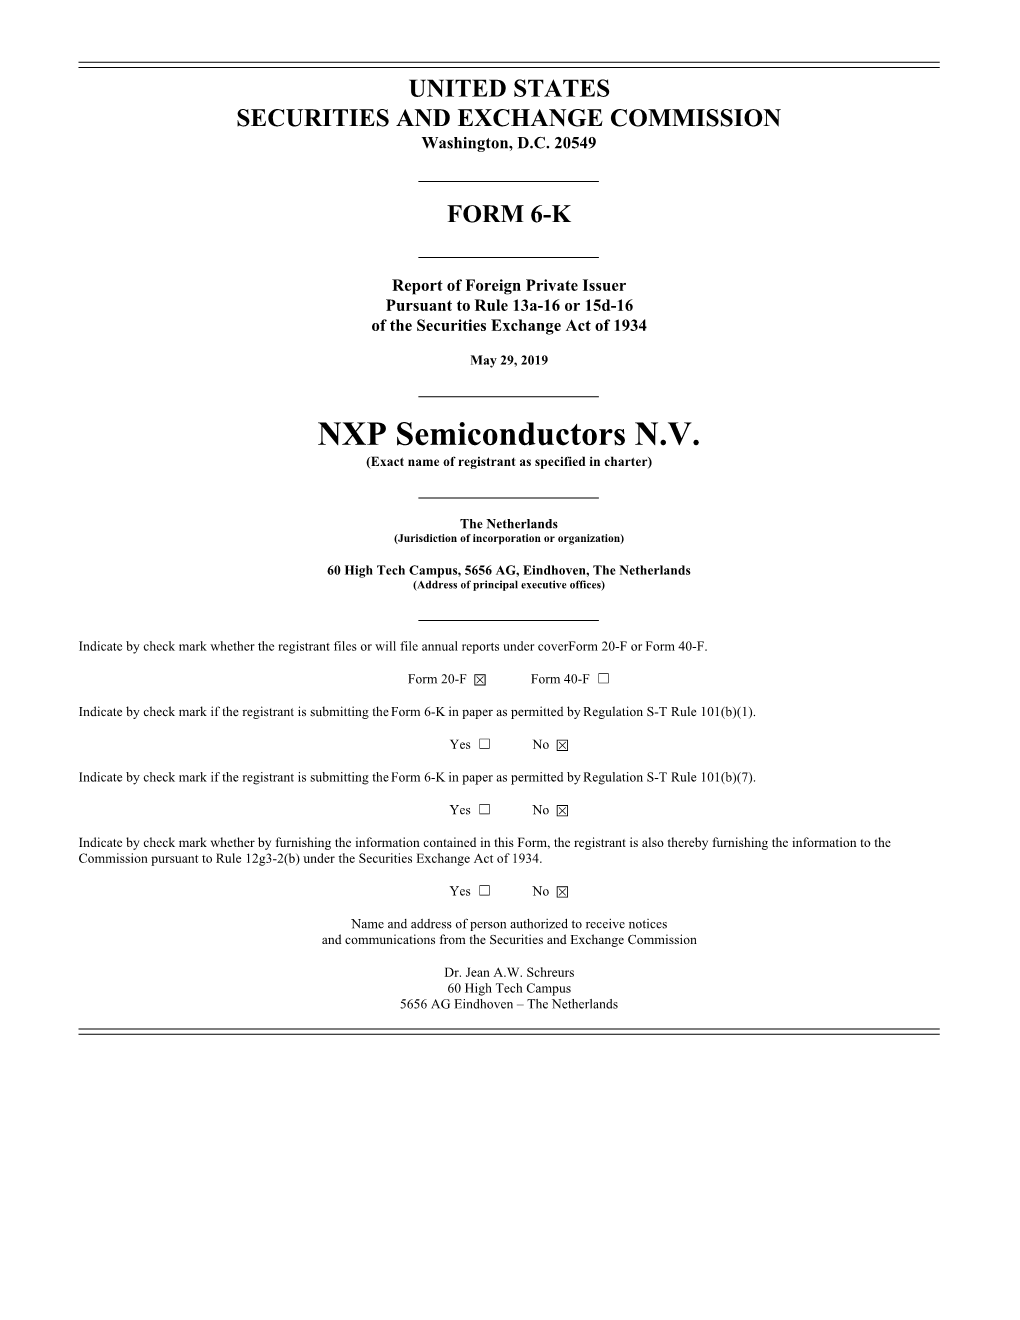 NXP Semiconductors N.V. (Exact Name of Registrant As Specified in Charter)